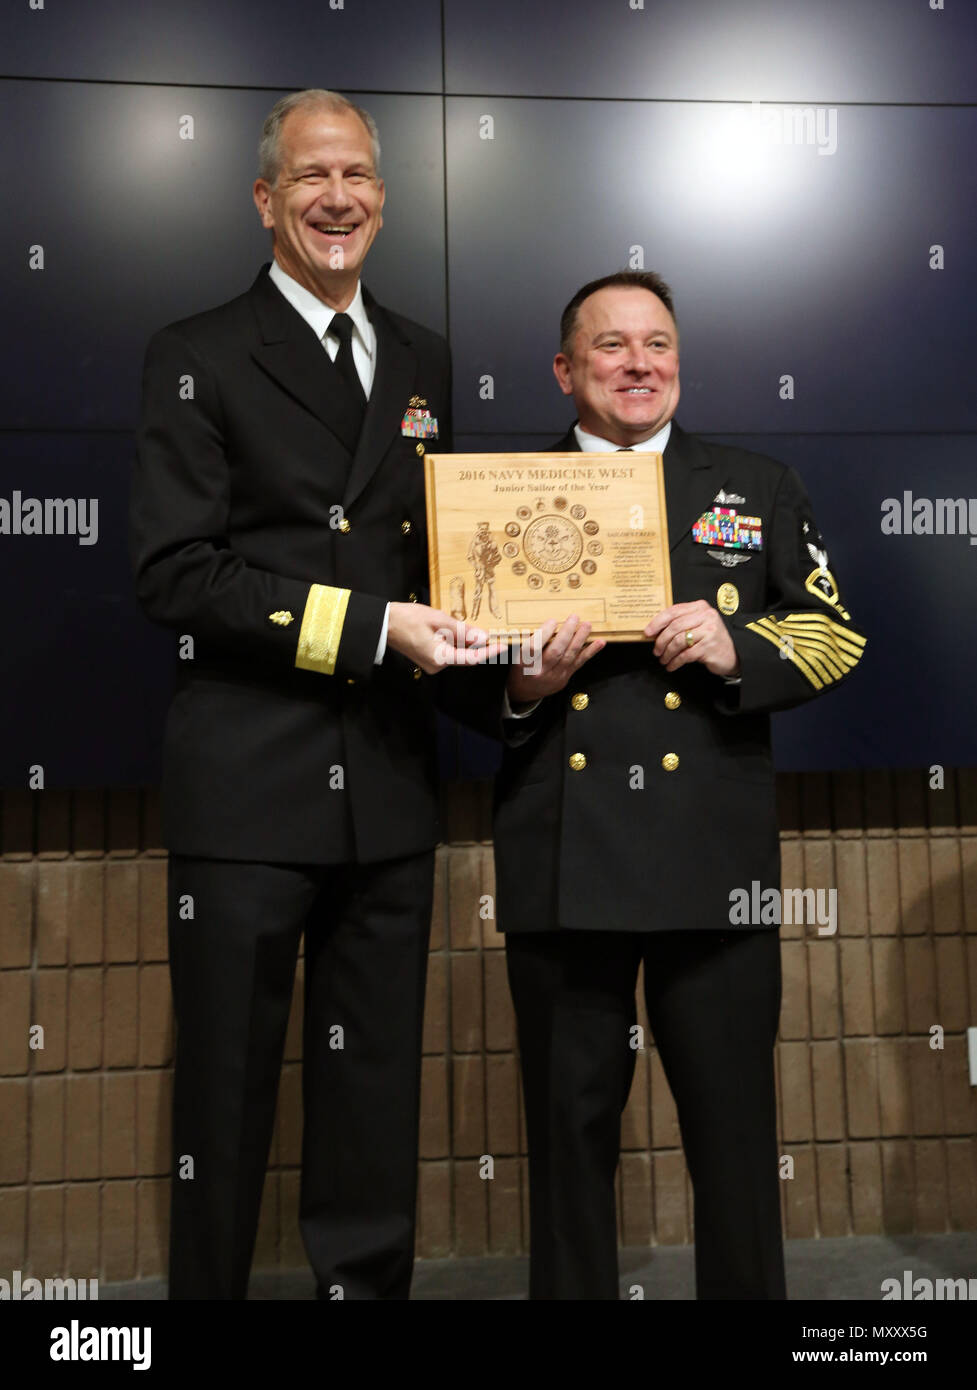 161209-N-KR391-002 SAN DIEGO (Dec 9, 2016) Master Chief Petty Officer Jeffrey Dell, Command Master Chief, Naval Hospital Oak Harbor, receives a plaque for the Navy Medicine West Junior Sailor of the Year on behalf of Petty Officer 2nd Class Christopher Hough, from Naval Hospital Oak Harbor, in an auditorium packed with Sailors and civilians at Navy Medicine West headquarters.  Rear Adm. Paul Pearigen, Commander Navy Medicine West (left) presented the plaque.  (Photo by Chief Petty Officer Kimberley Blaine-Sweet /Released) Stock Photo